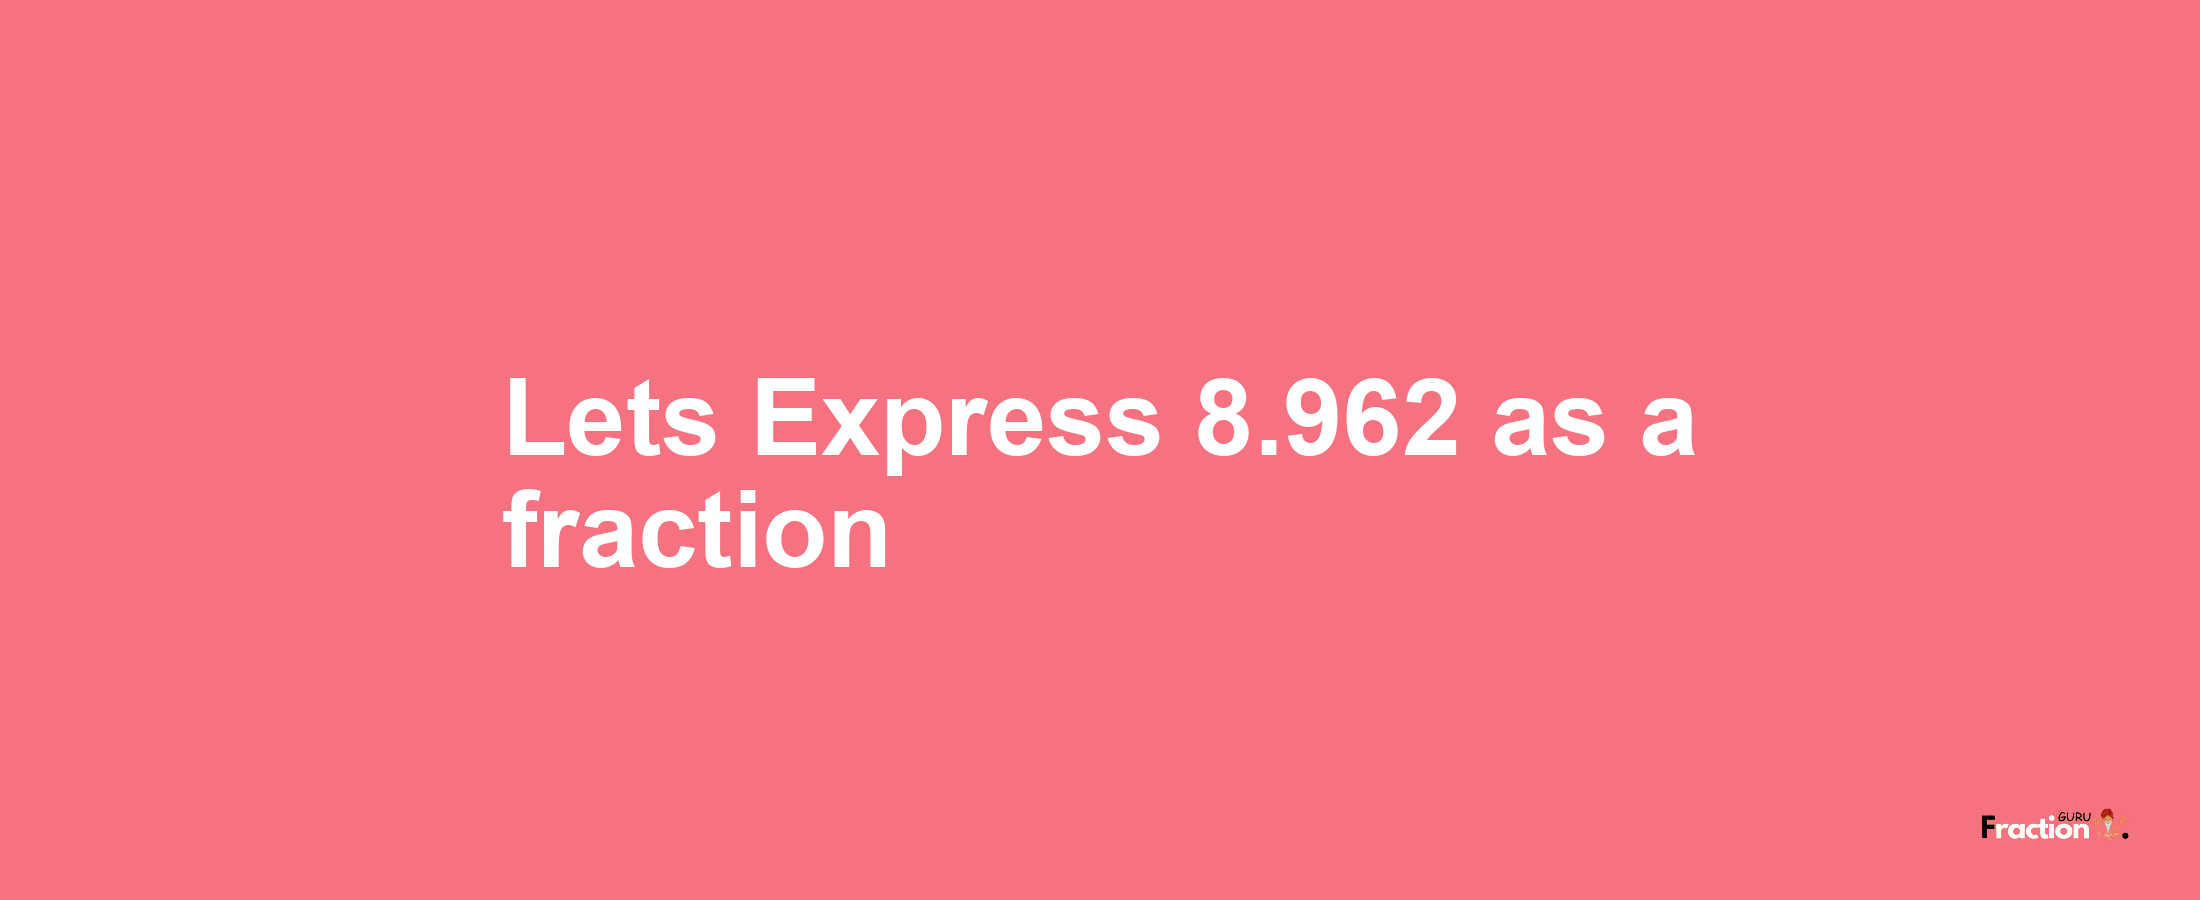 Lets Express 8.962 as afraction